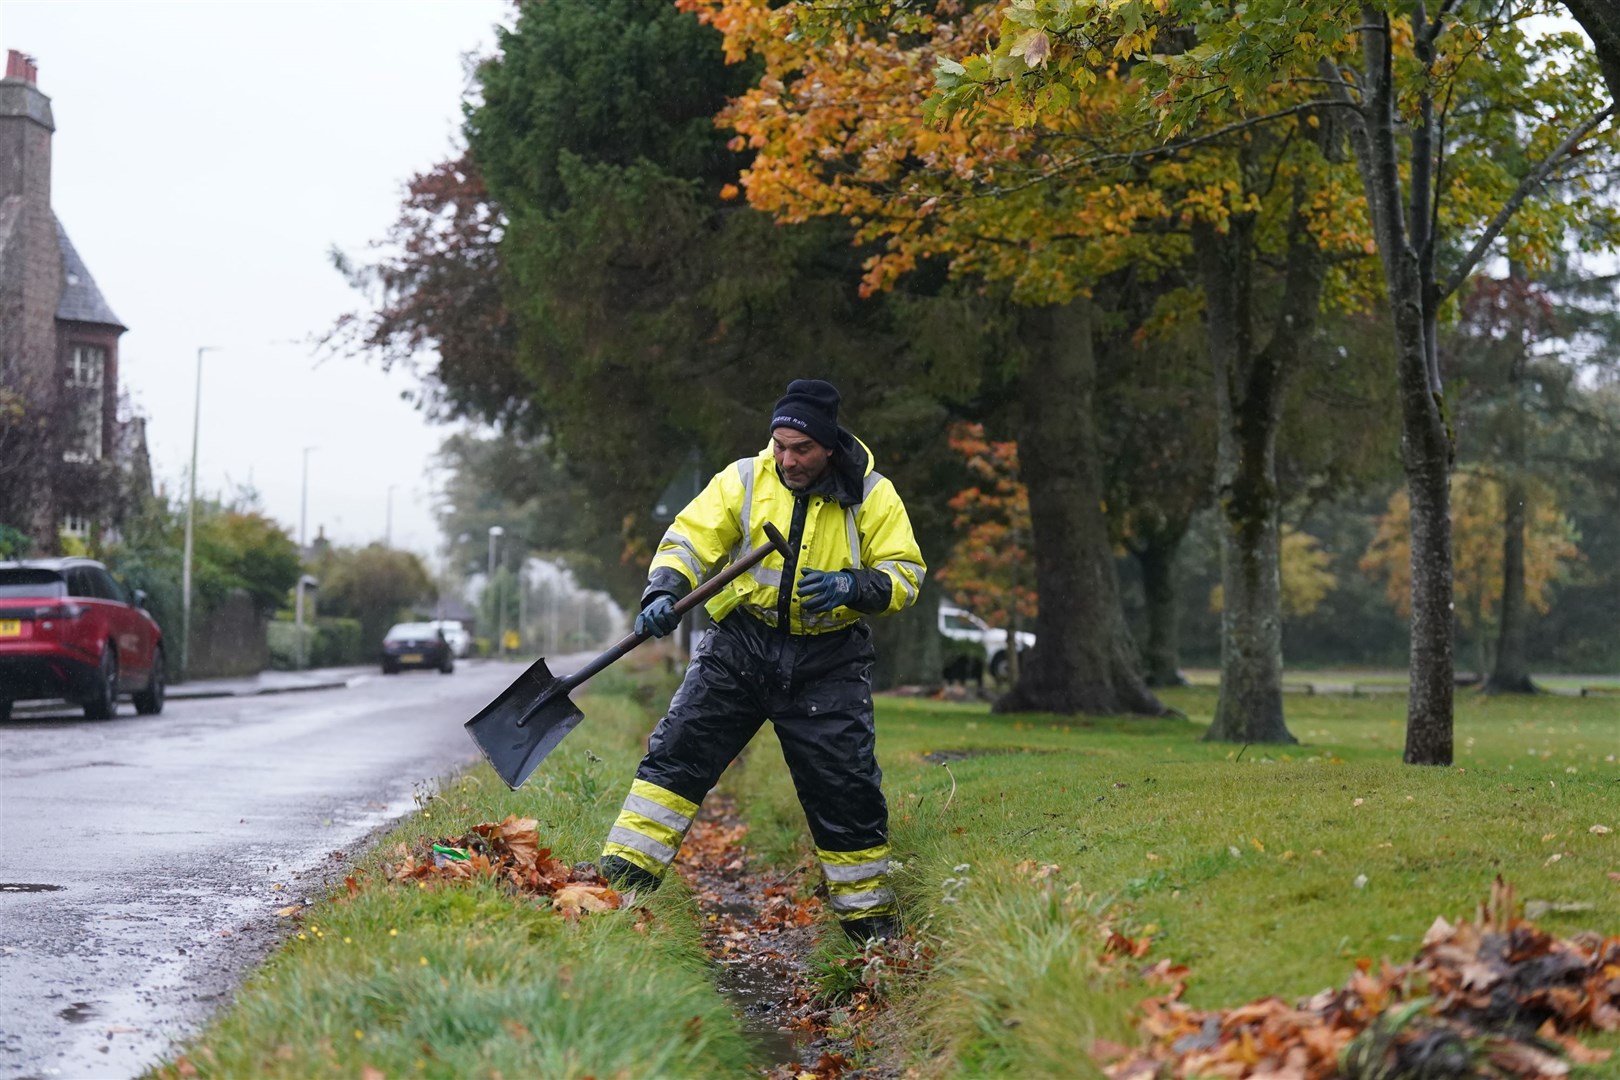 A workman clears a drainage ditch in the village of Edzell, Scotland (Andrew Milligan/PA)